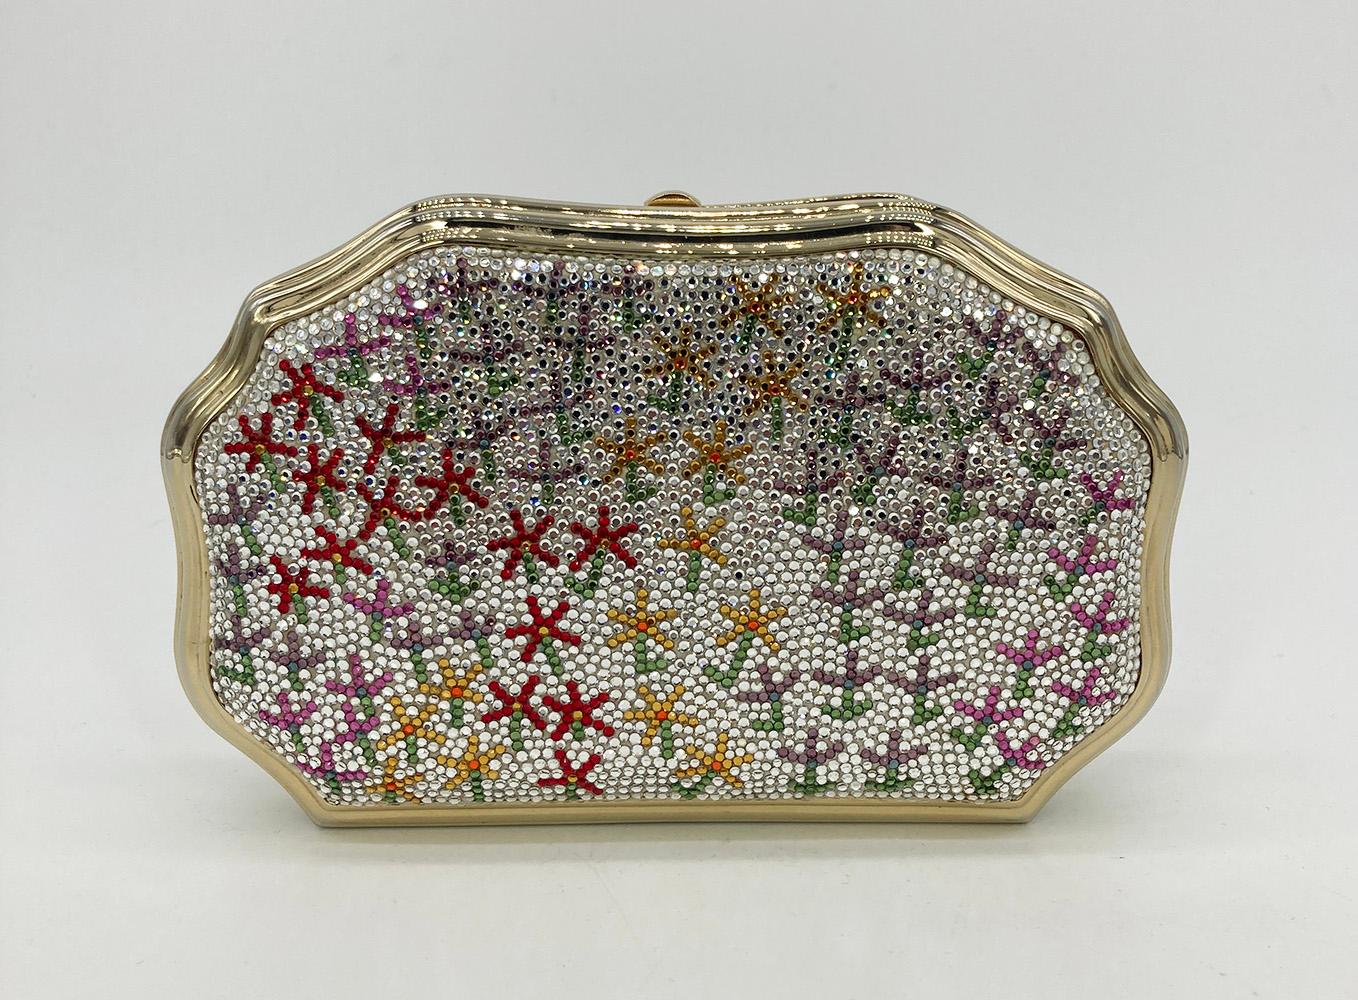 Vintage Judith Leiber Floral Print Minaudiere in very good condition. Clear swarovski crystals with red, pink, purple and orange stick figure flowers along both front and back sides. Top button closure opens to a gold leather interior with hidden